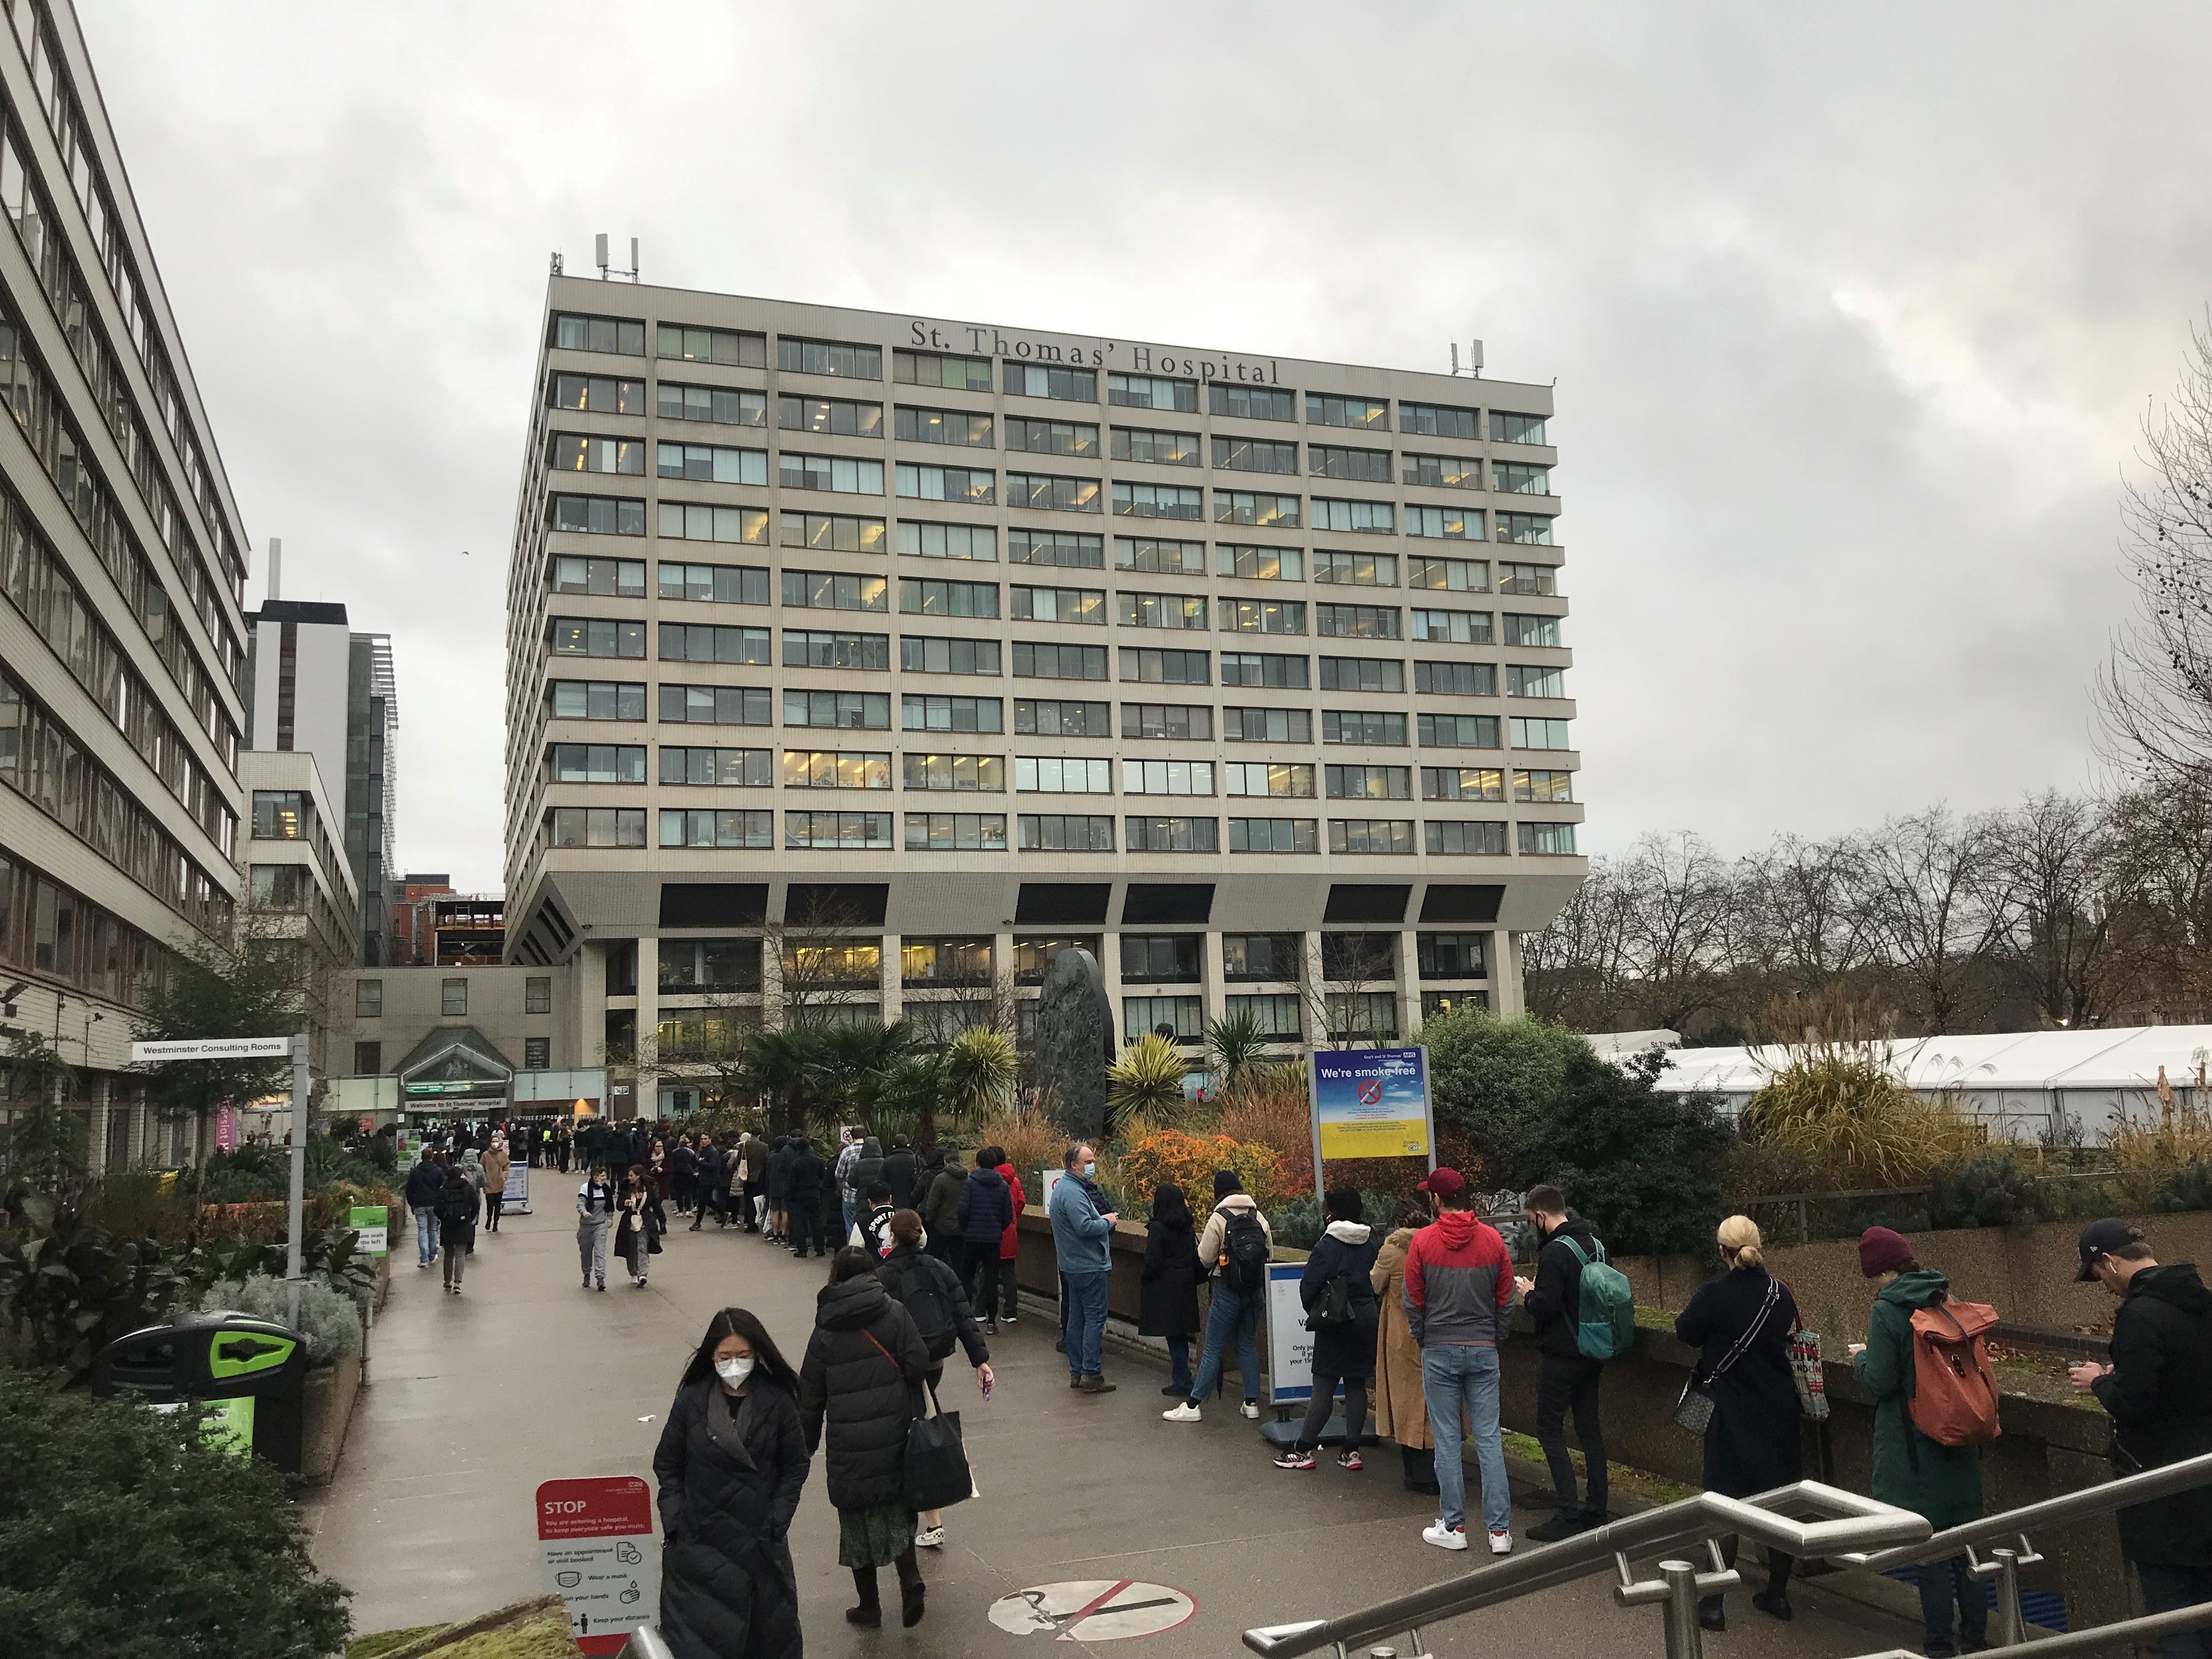 People queuing for booster jabs at St Thomas Hospital, London. Everyone over 18 in England will be offered booster jabs from this week, the PM said on Sunday, as he declared an ‘omicron emergency’